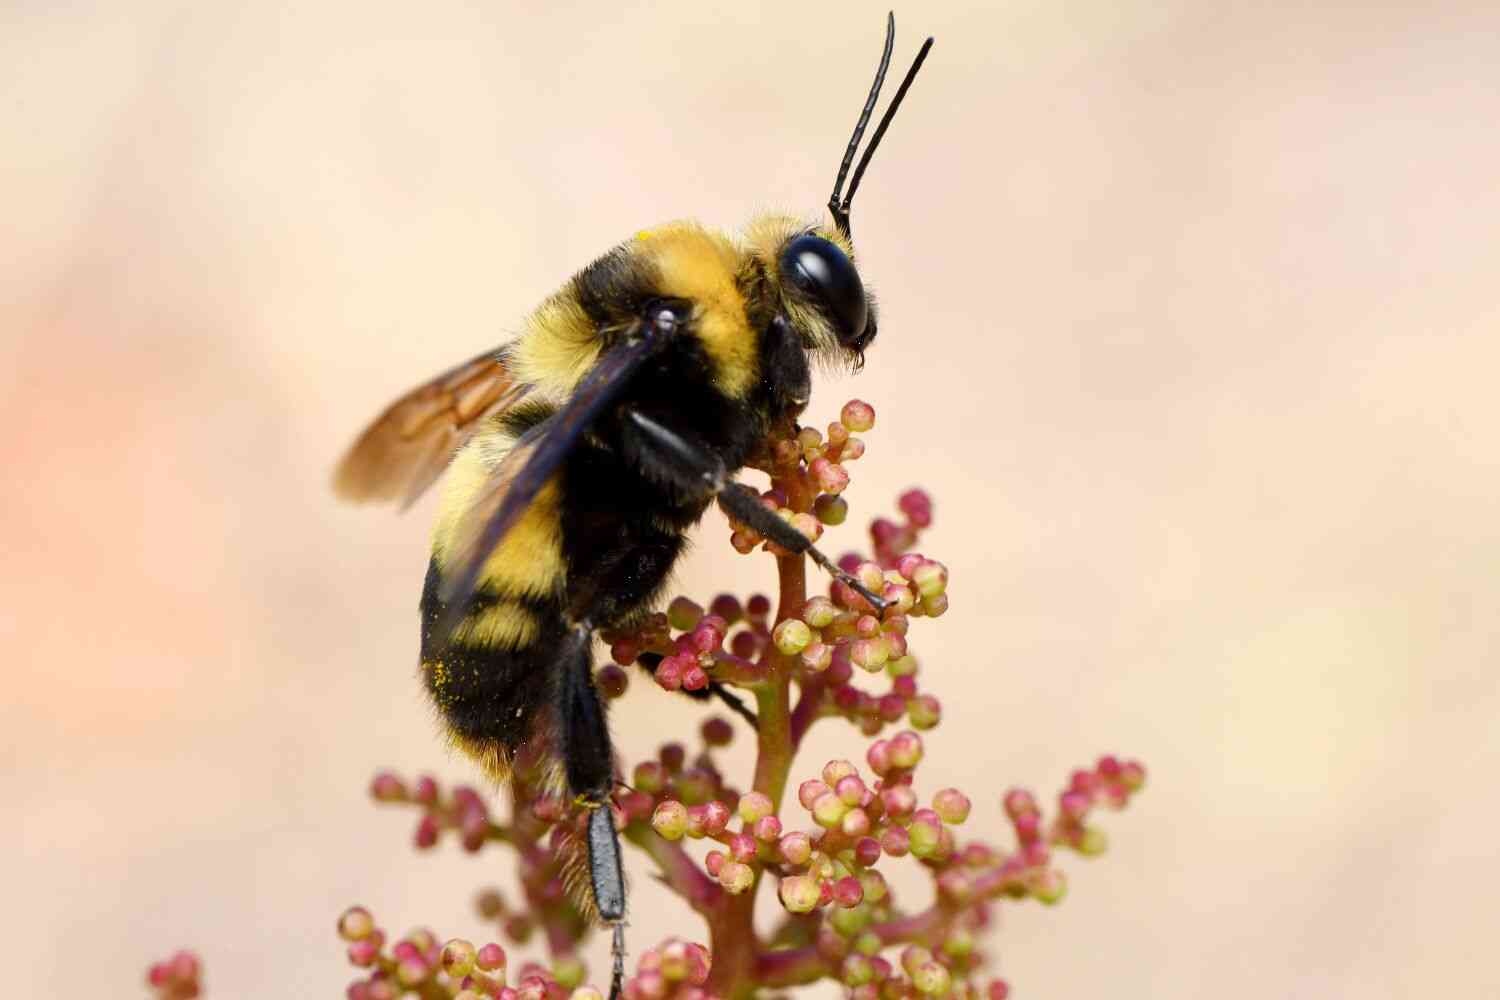 Bumblebees don't need federal protection, federal appeals court rules